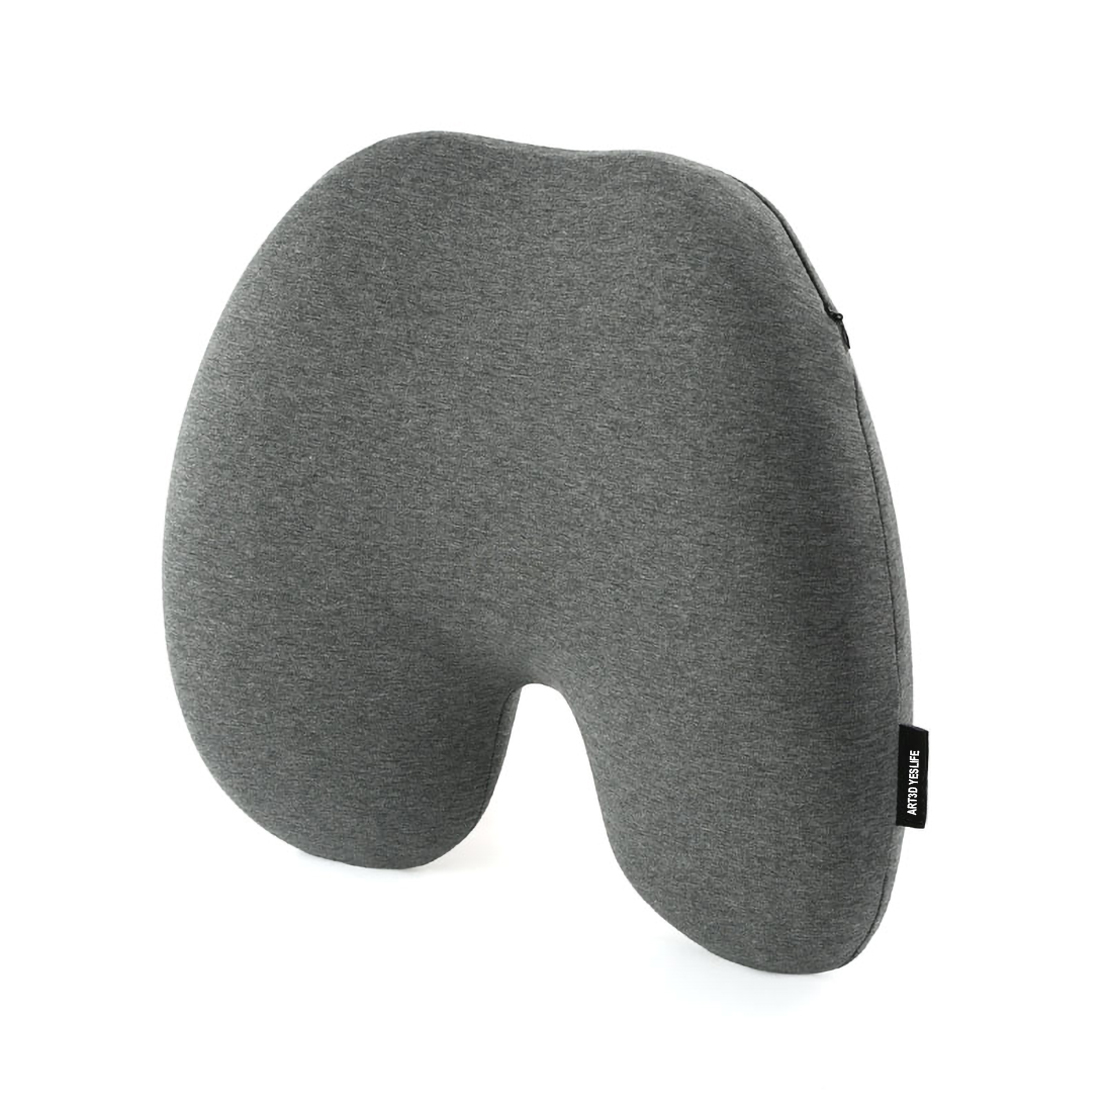 Gray Premium Lumbar Support Pillow Designed for Lower Back Pain Relief - Ideal Back Cushion for Computer/Office Chair, Car Seat